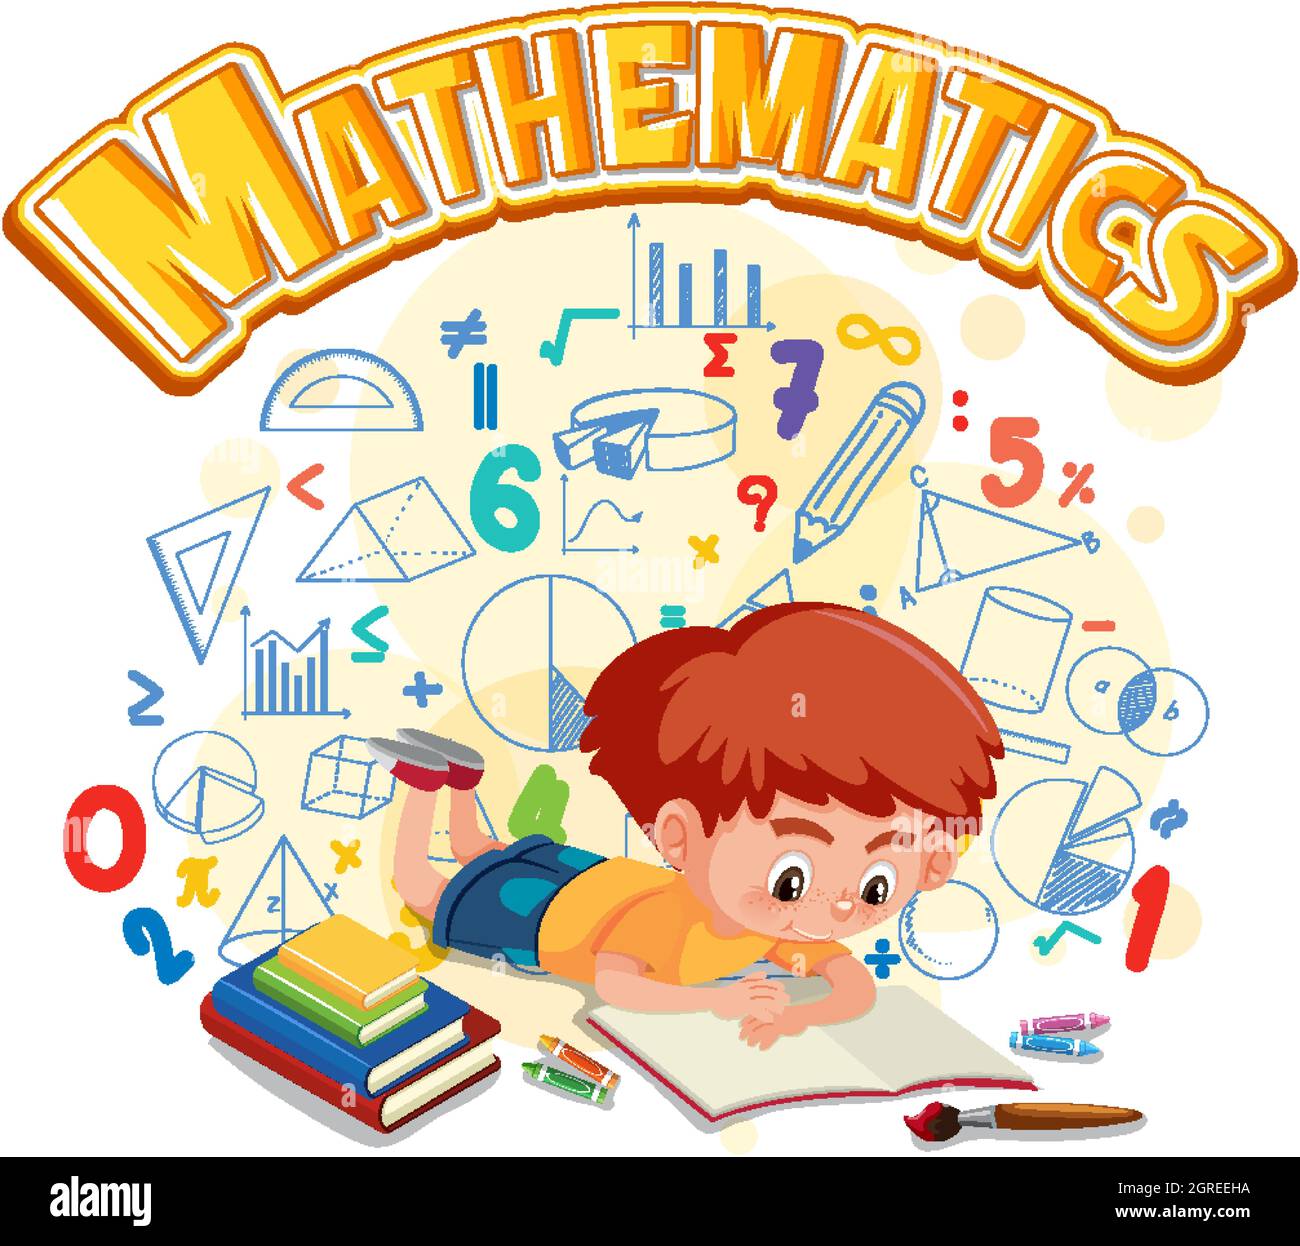 Isolated Mathematics font banner withboy cartoon character illustration ...